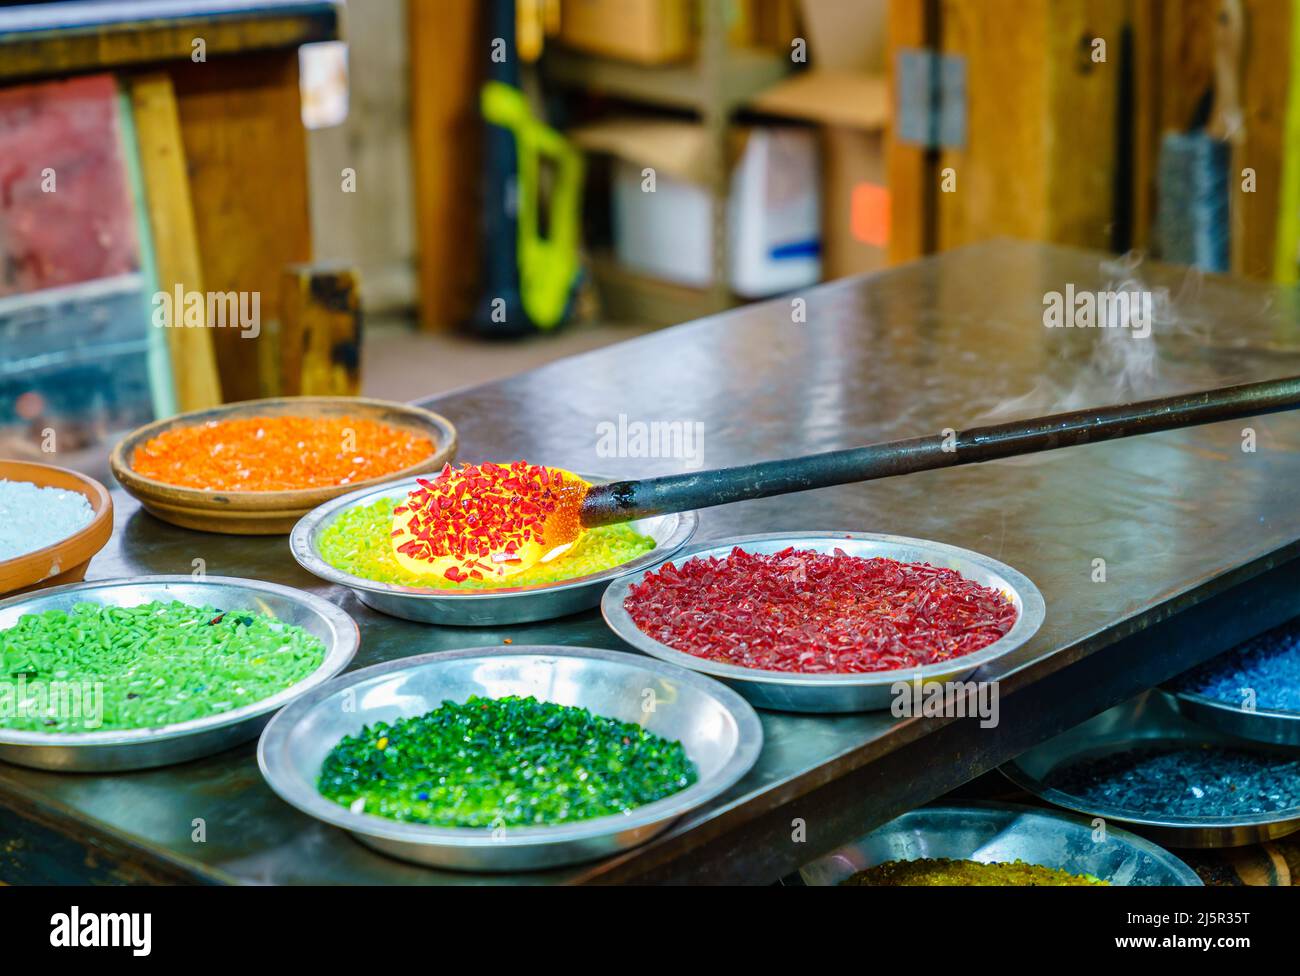 Jars of pulled cane and frit glass blowing supplies Stock Photo - Alamy